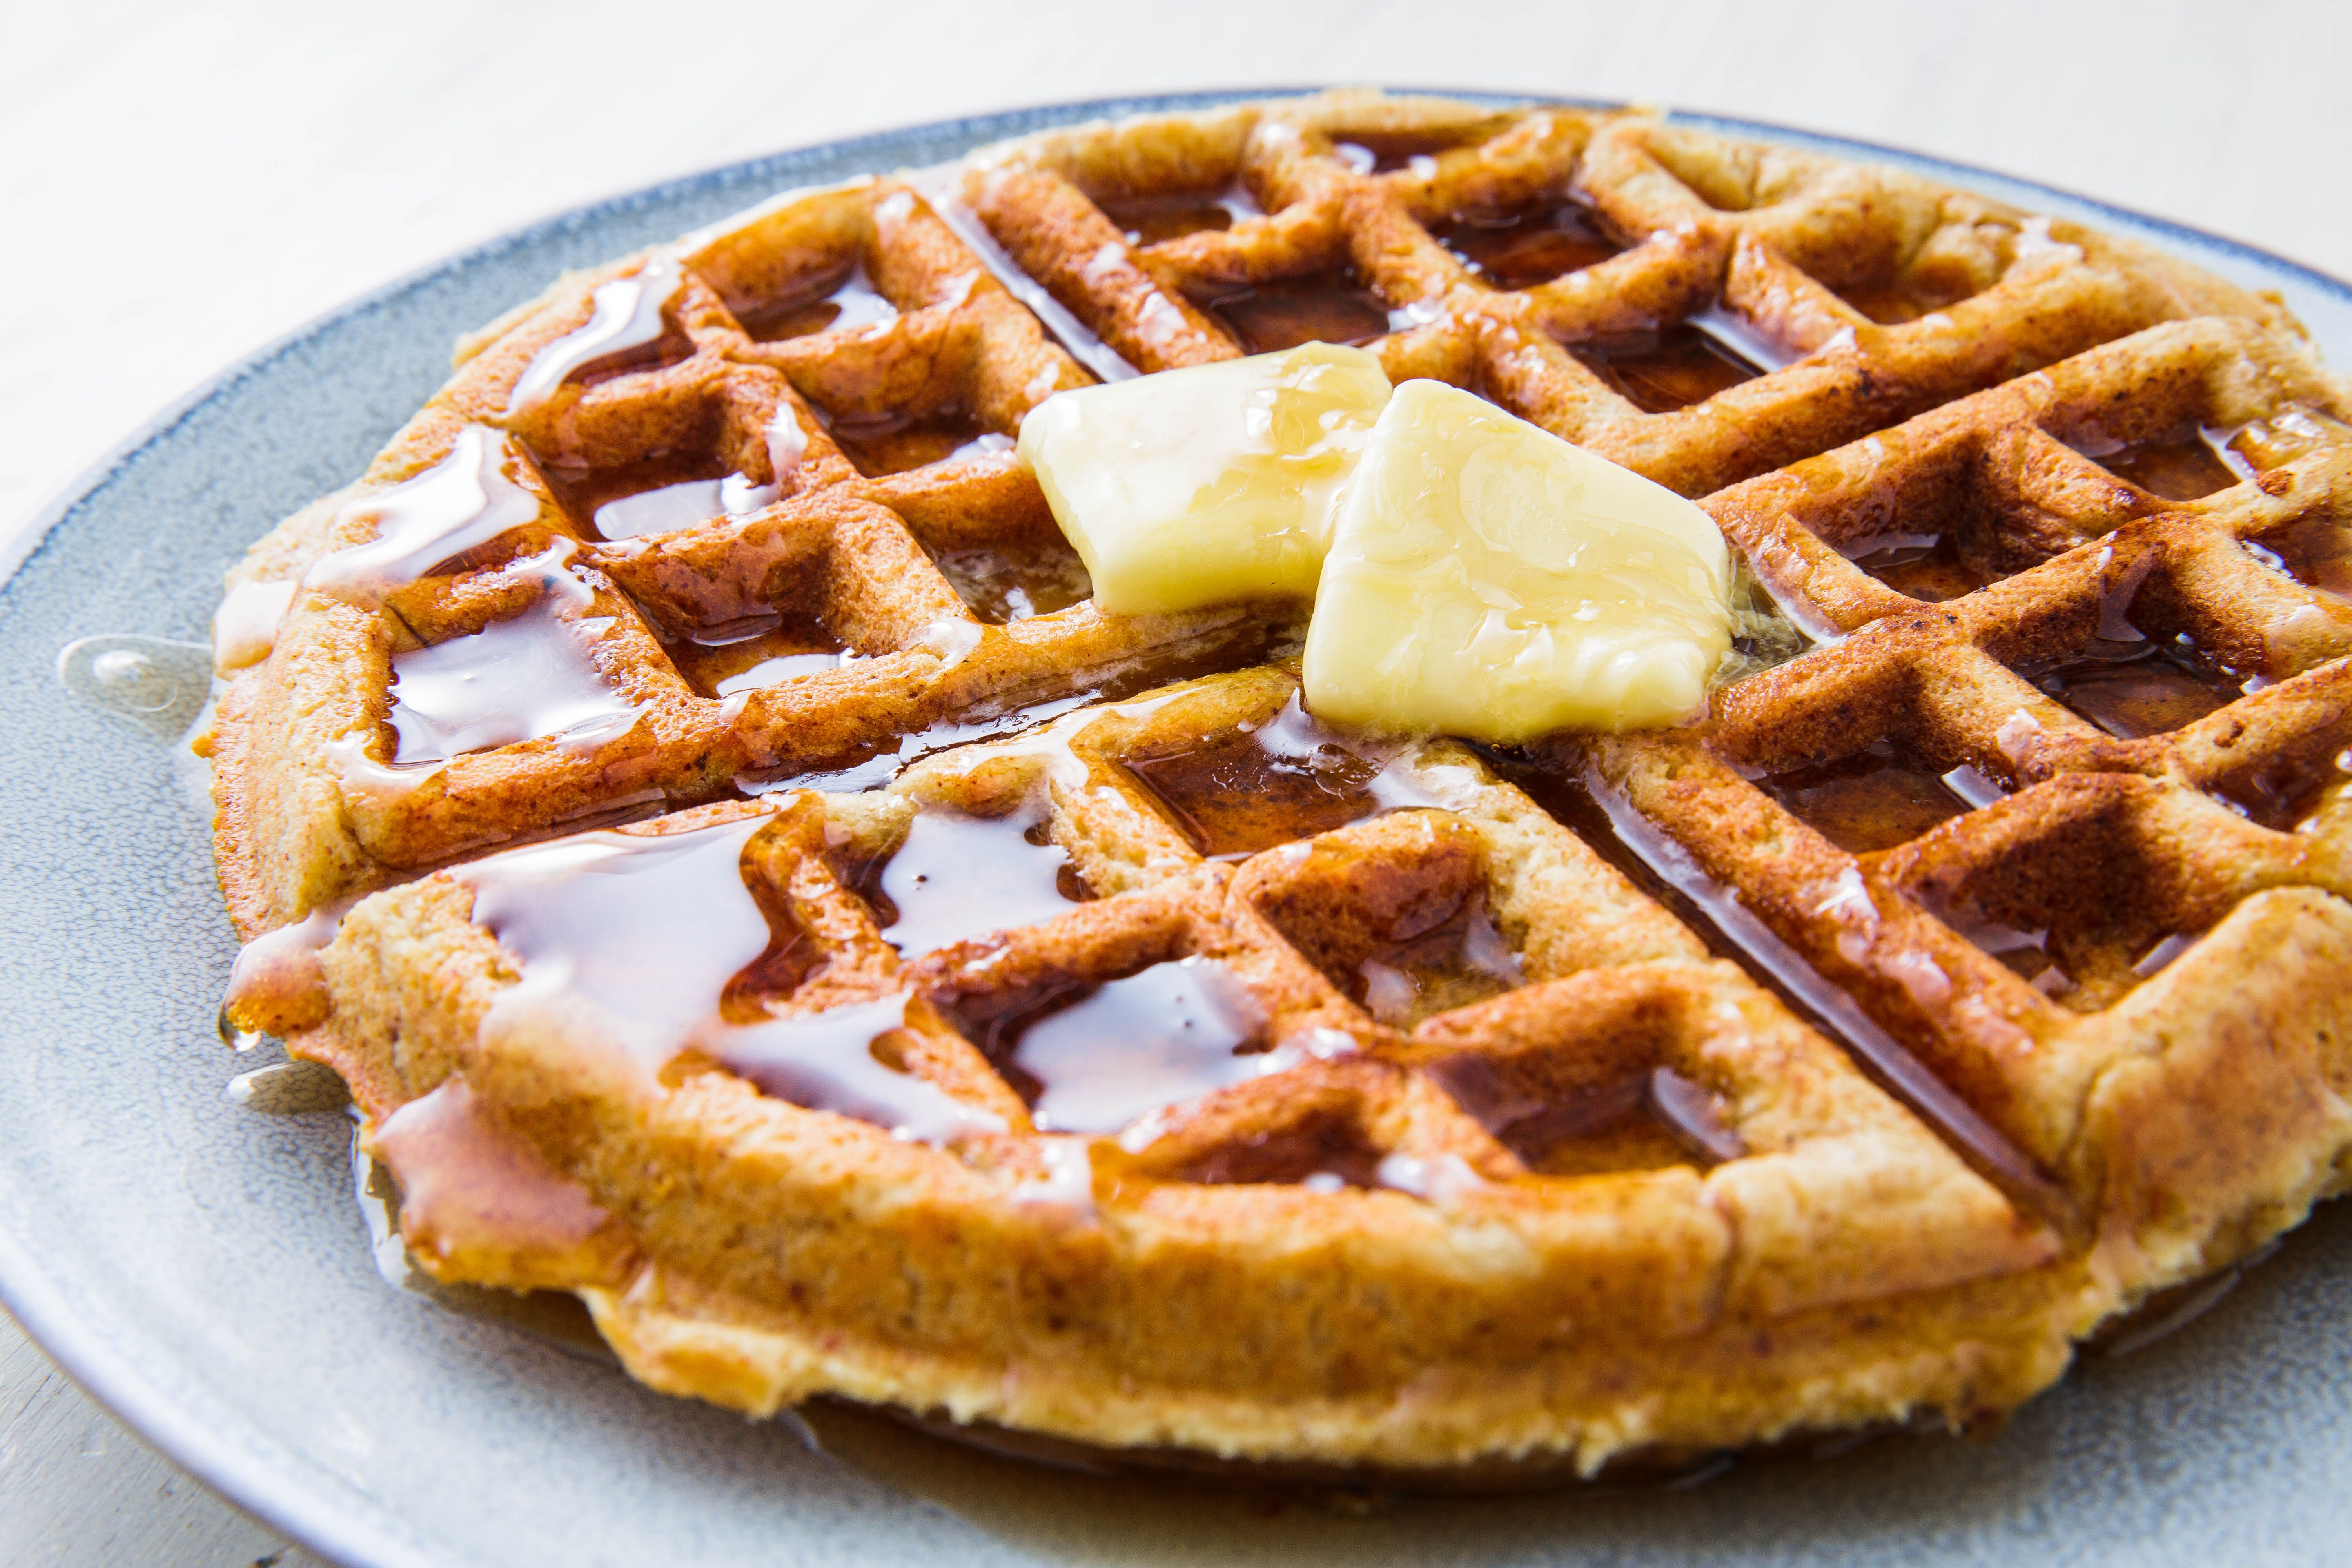 Almond Flour Waffles Recipe - Only 4 Ingredients - Low Carb & Keto